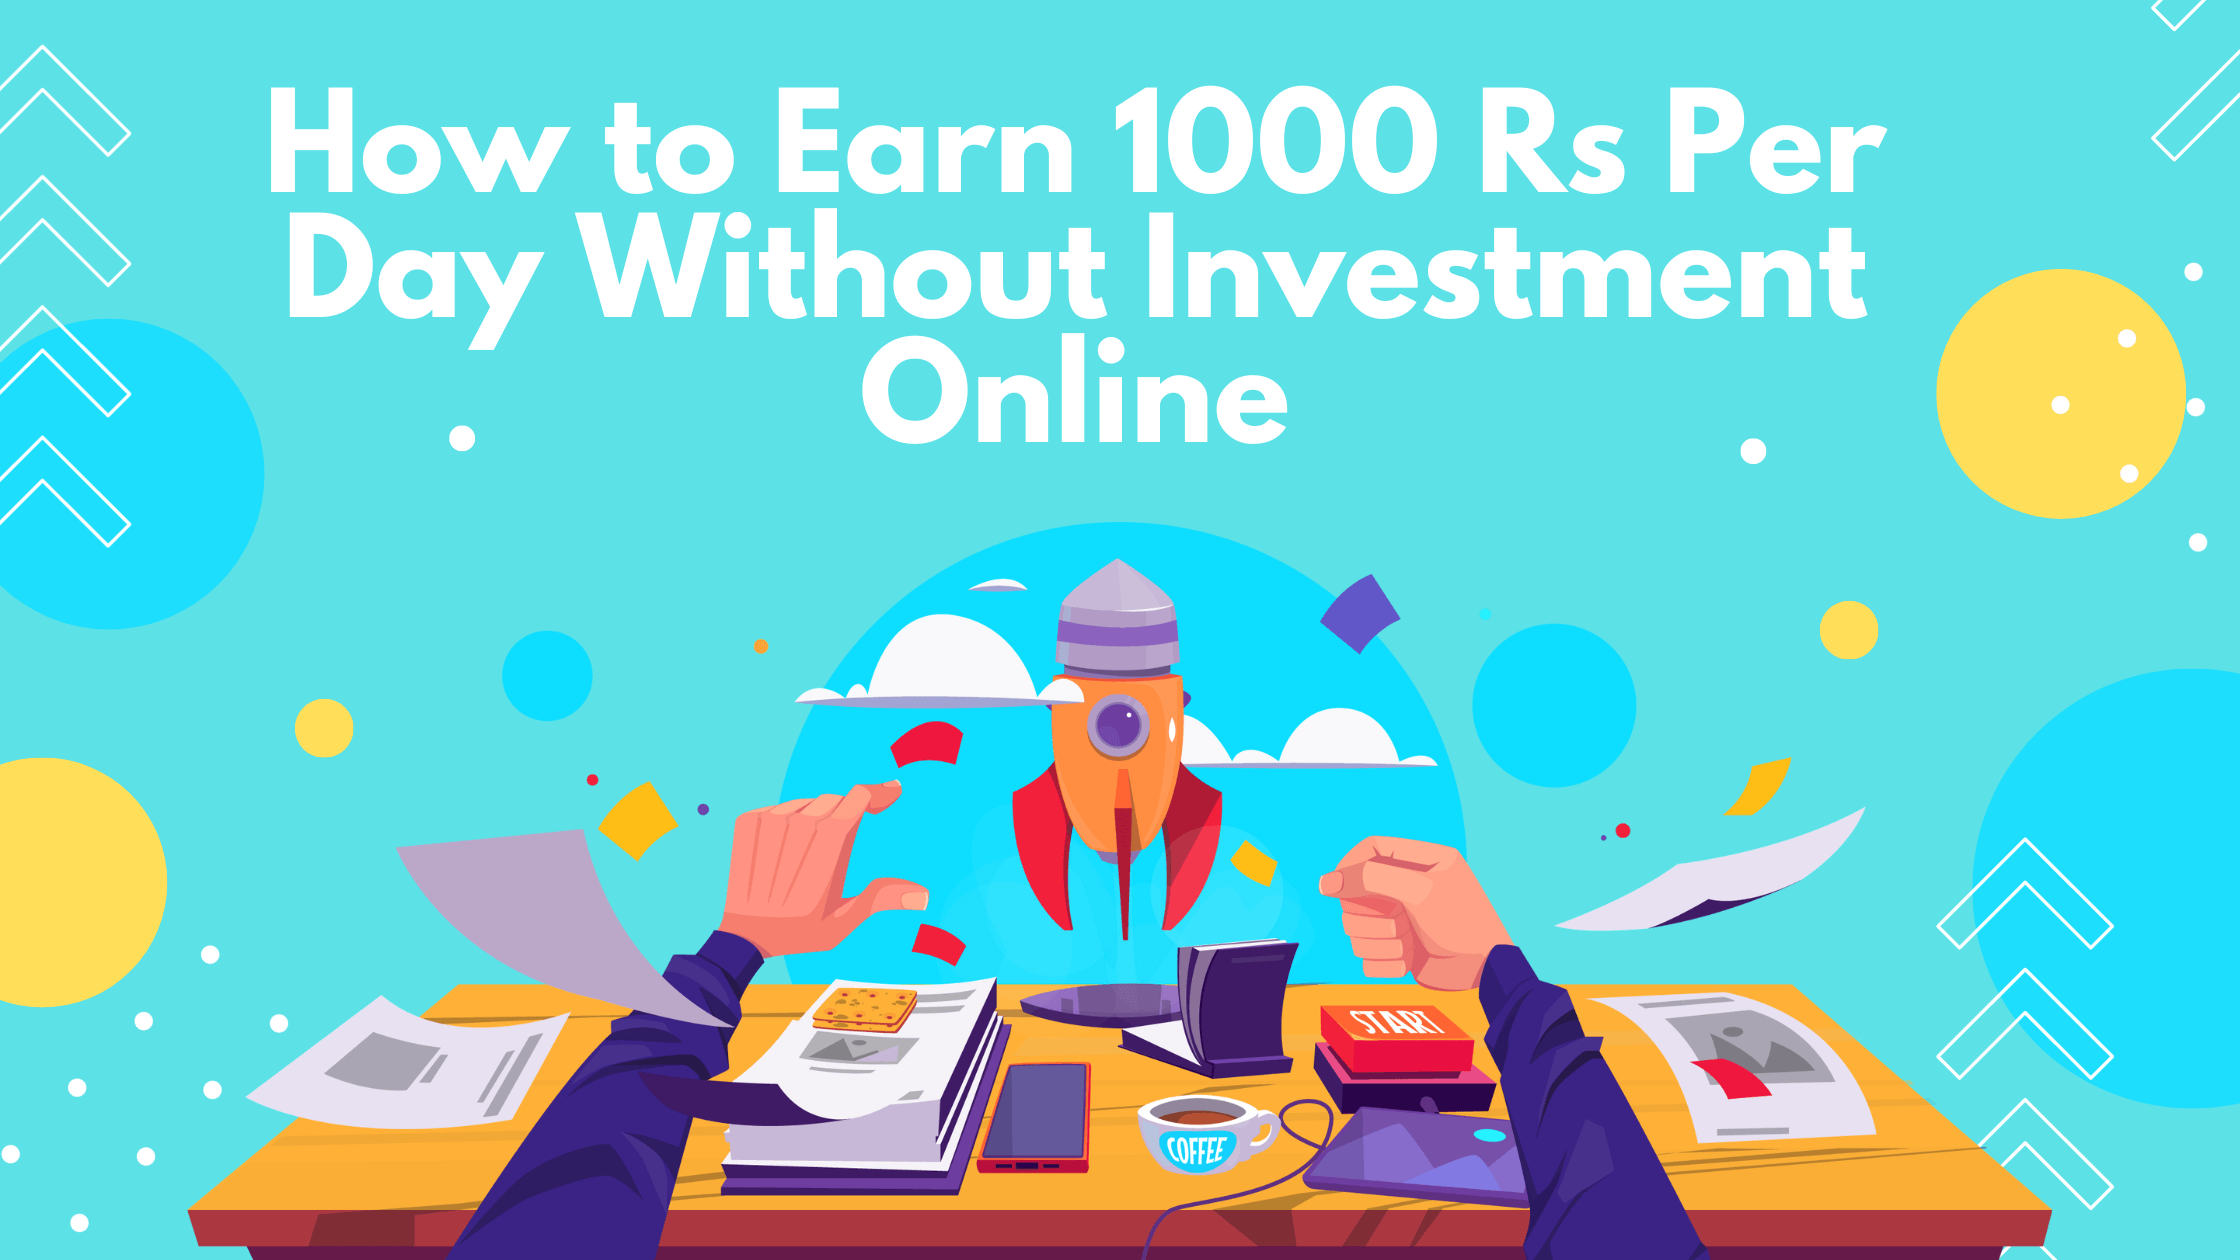 How to Earn 1000 Rs Per Day Without Investment Online